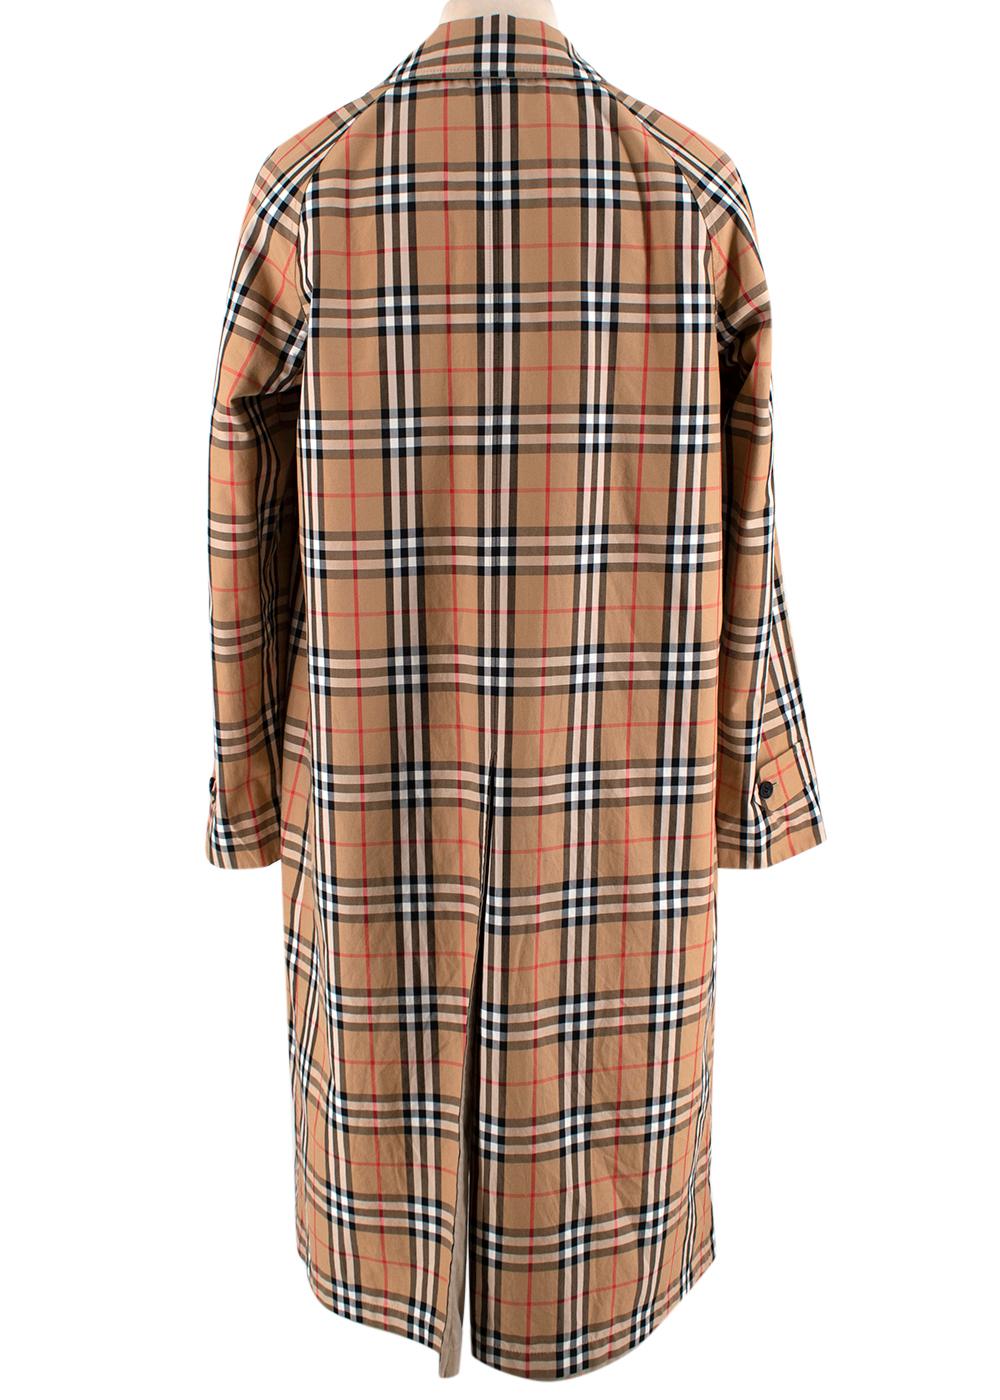 Burberry Beige/Vintage Check Reversible Single Breasted Trench Coat  - EU46 In Excellent Condition For Sale In London, GB